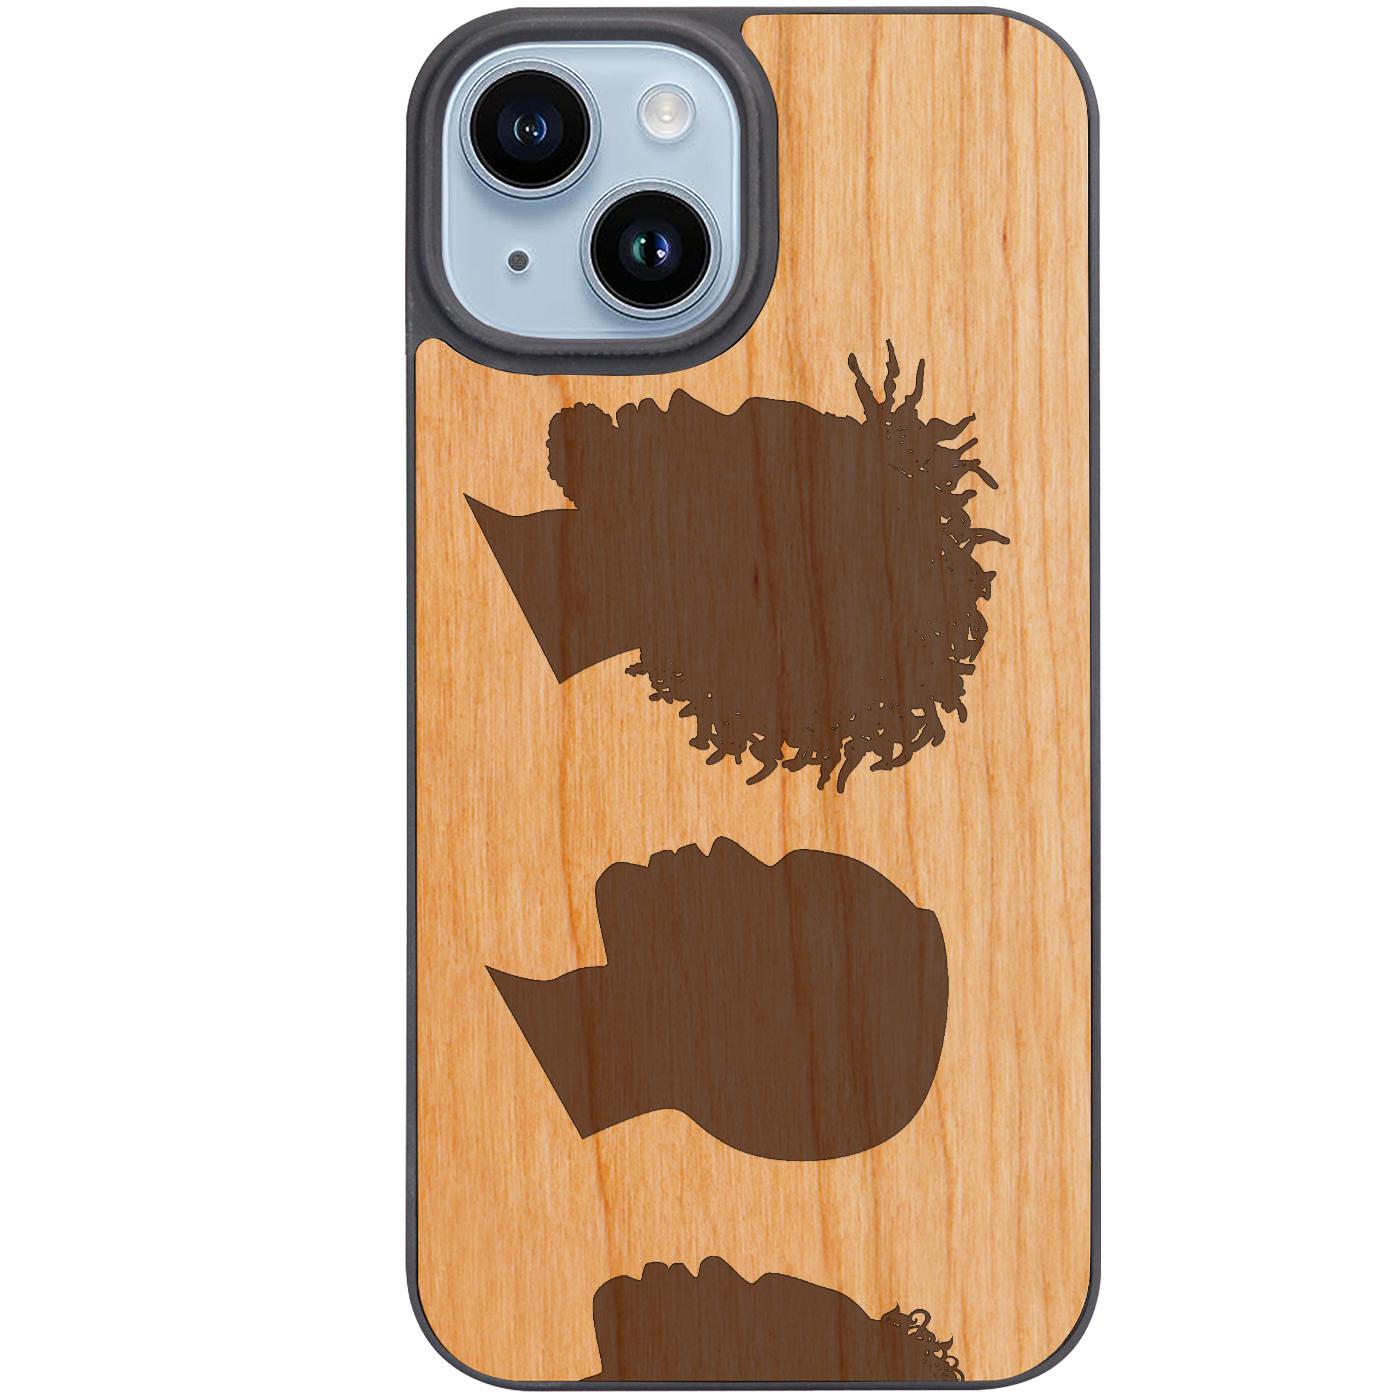 African Man Faces - Engraved Phone Case